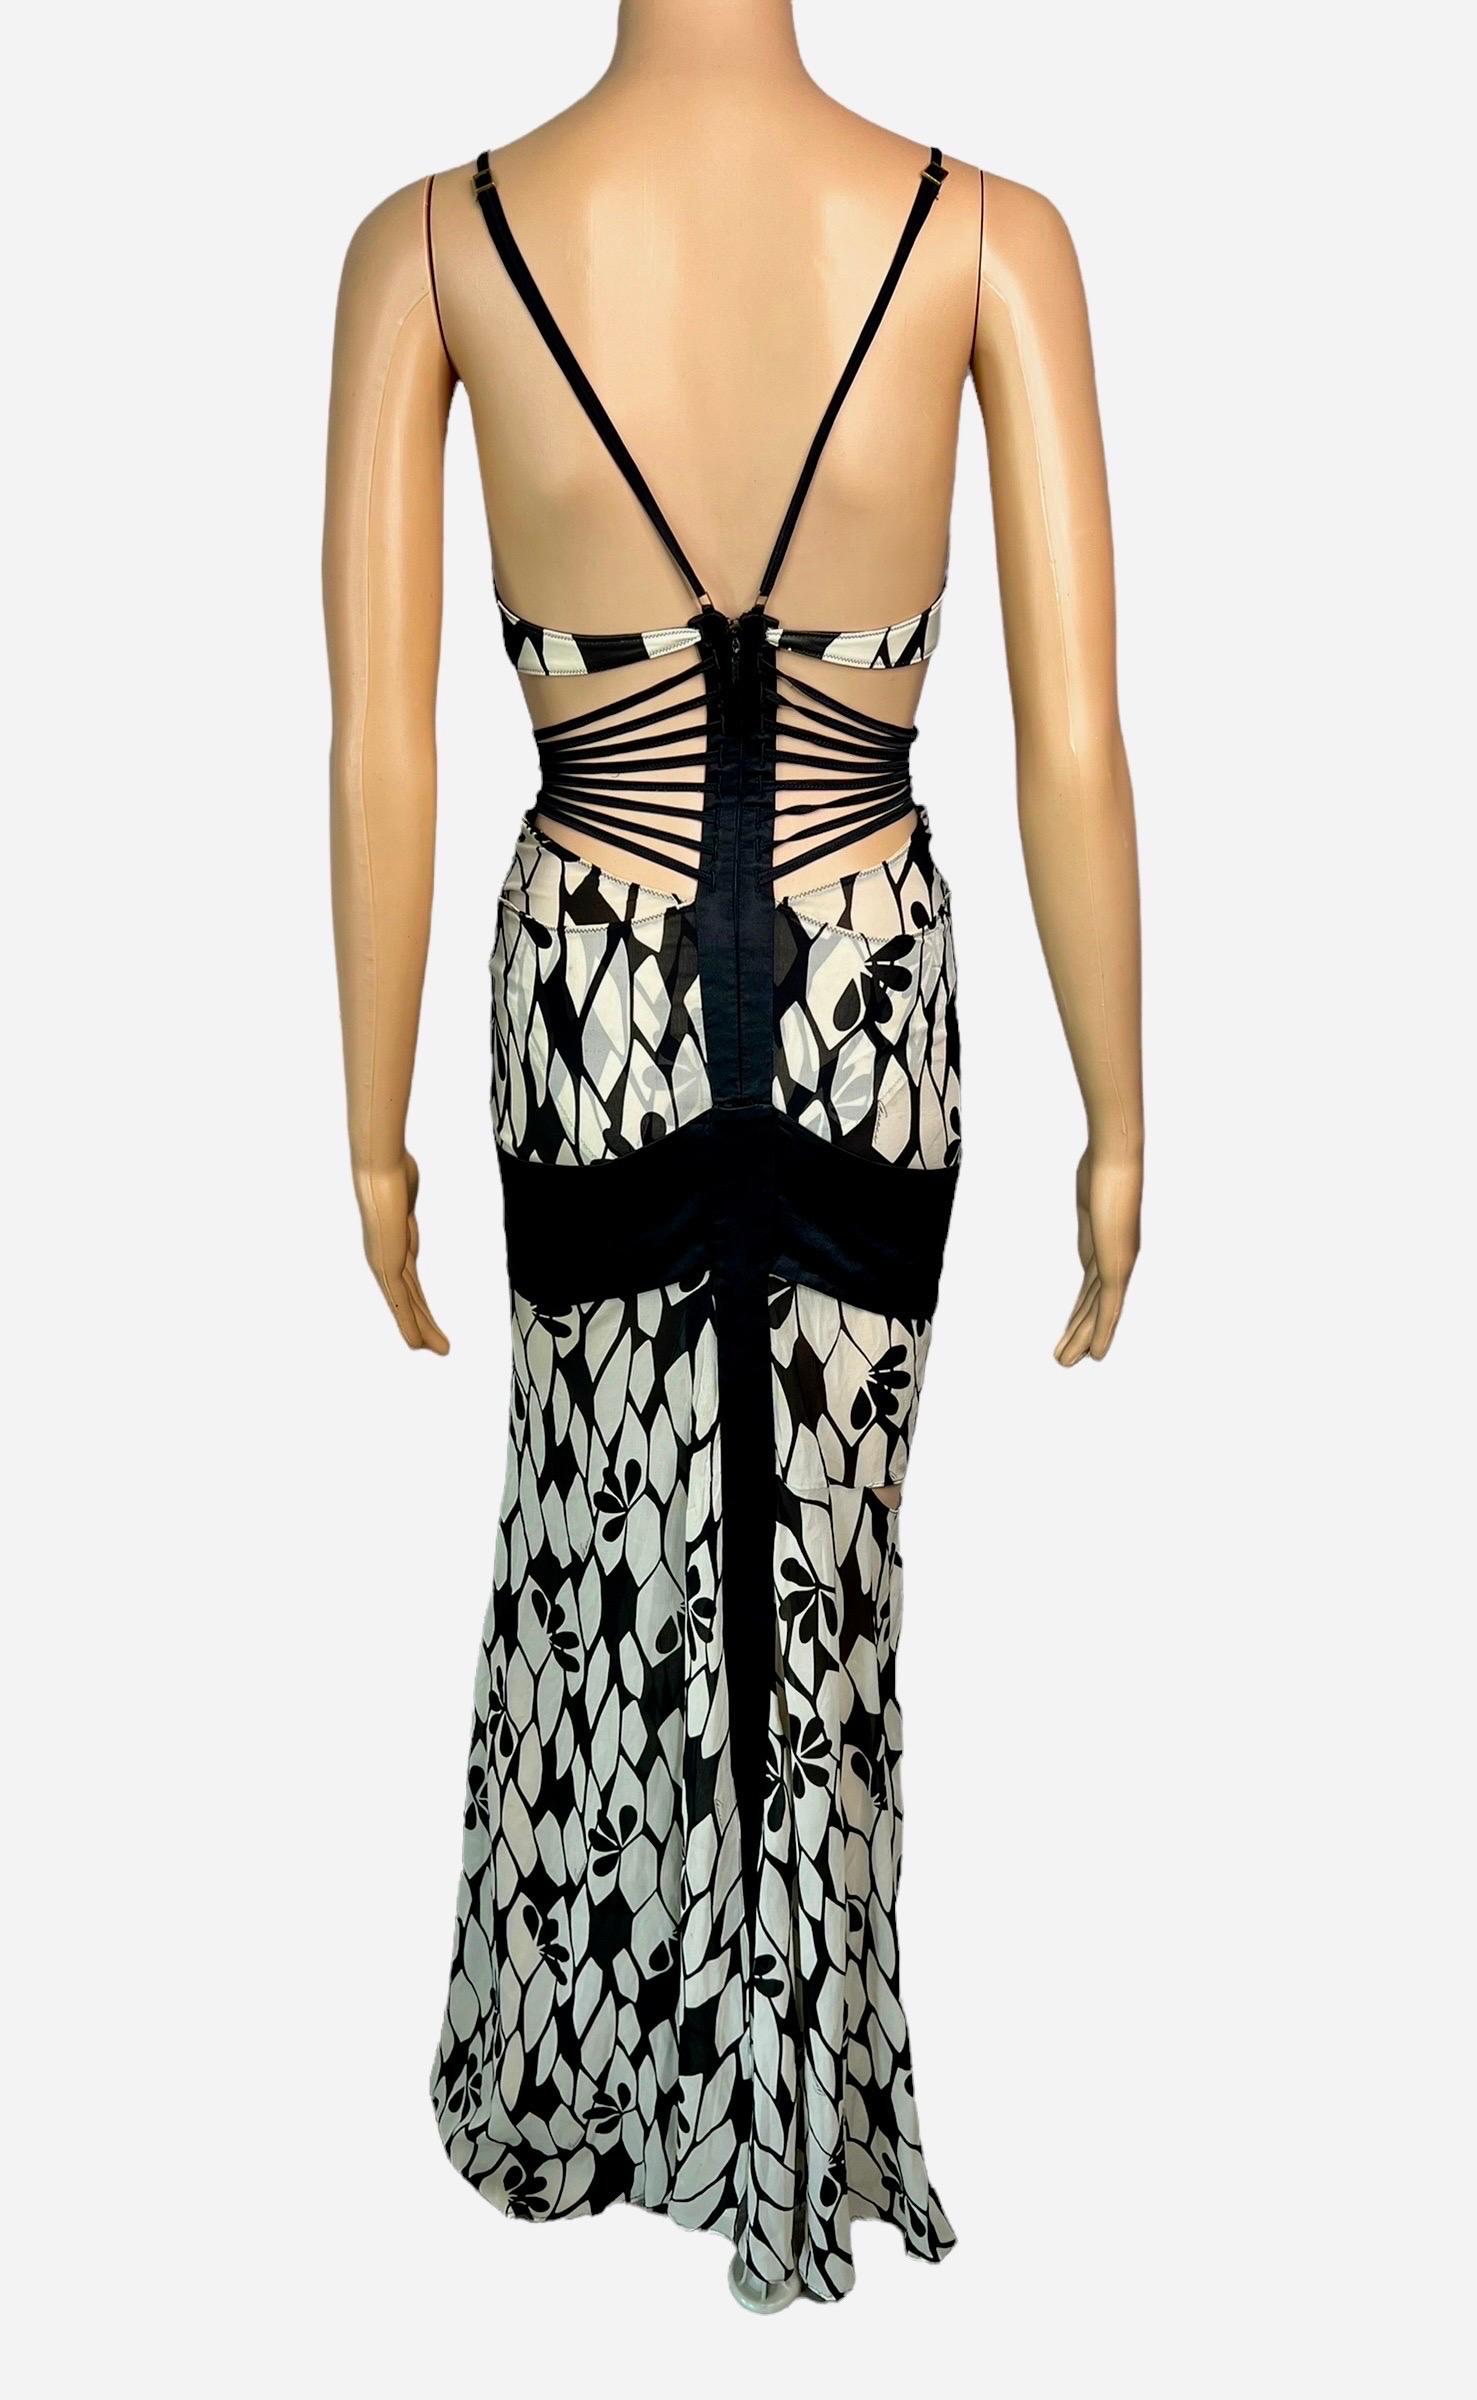 Tom Ford for Gucci c.2003 Plunging Bra Cutout Strappy Silk Evening Dress Gown For Sale 2